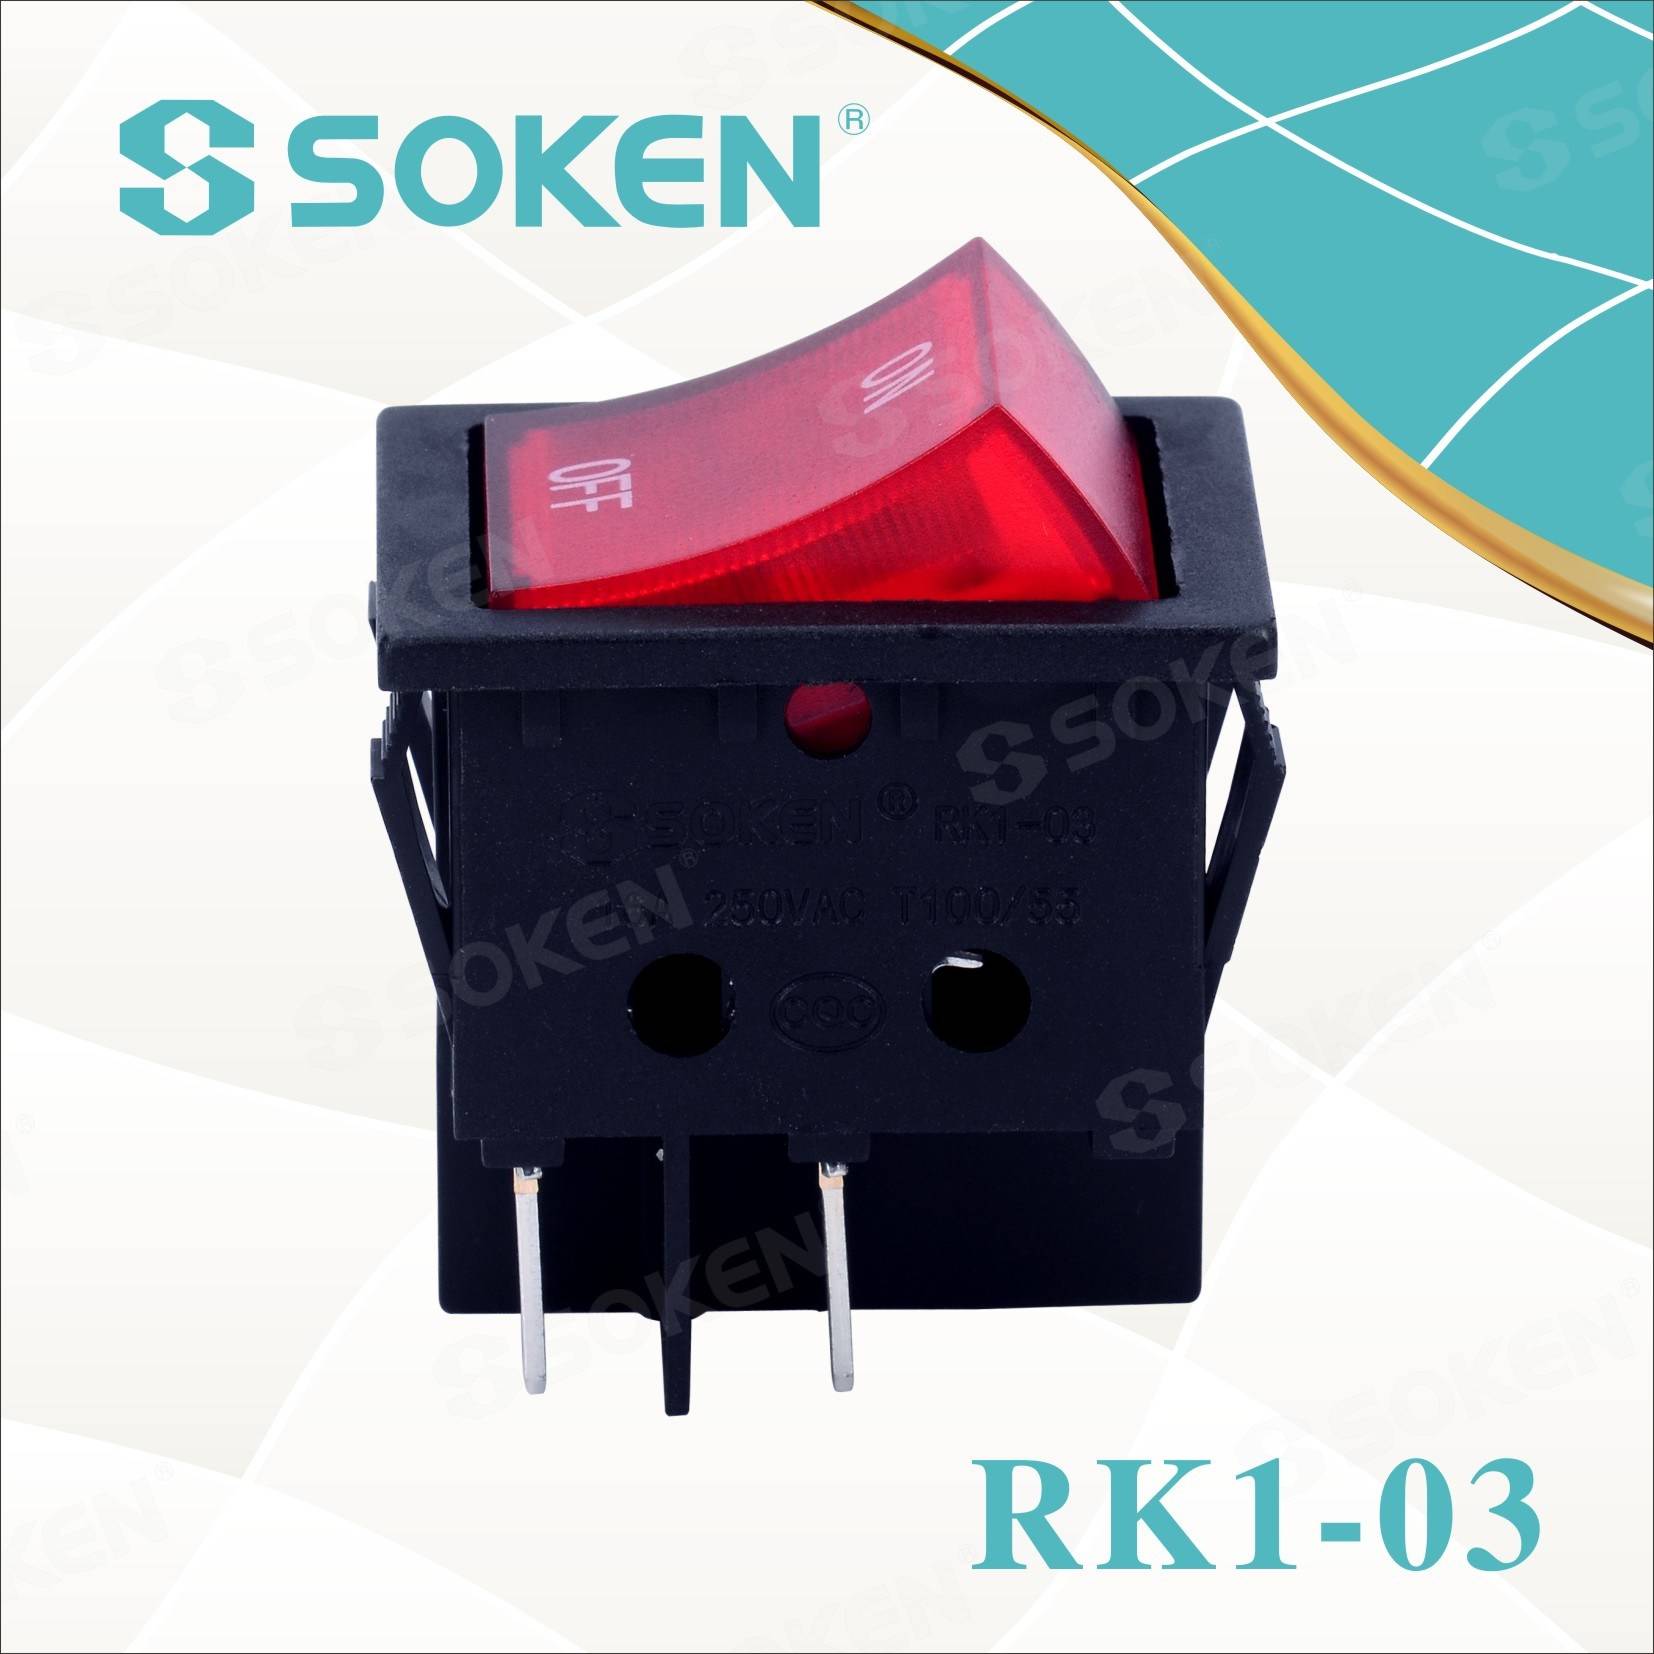 Reasonable price for Illuminated Switches -
 Lighted on off Rocker Switch Panel – Master Soken Electrical